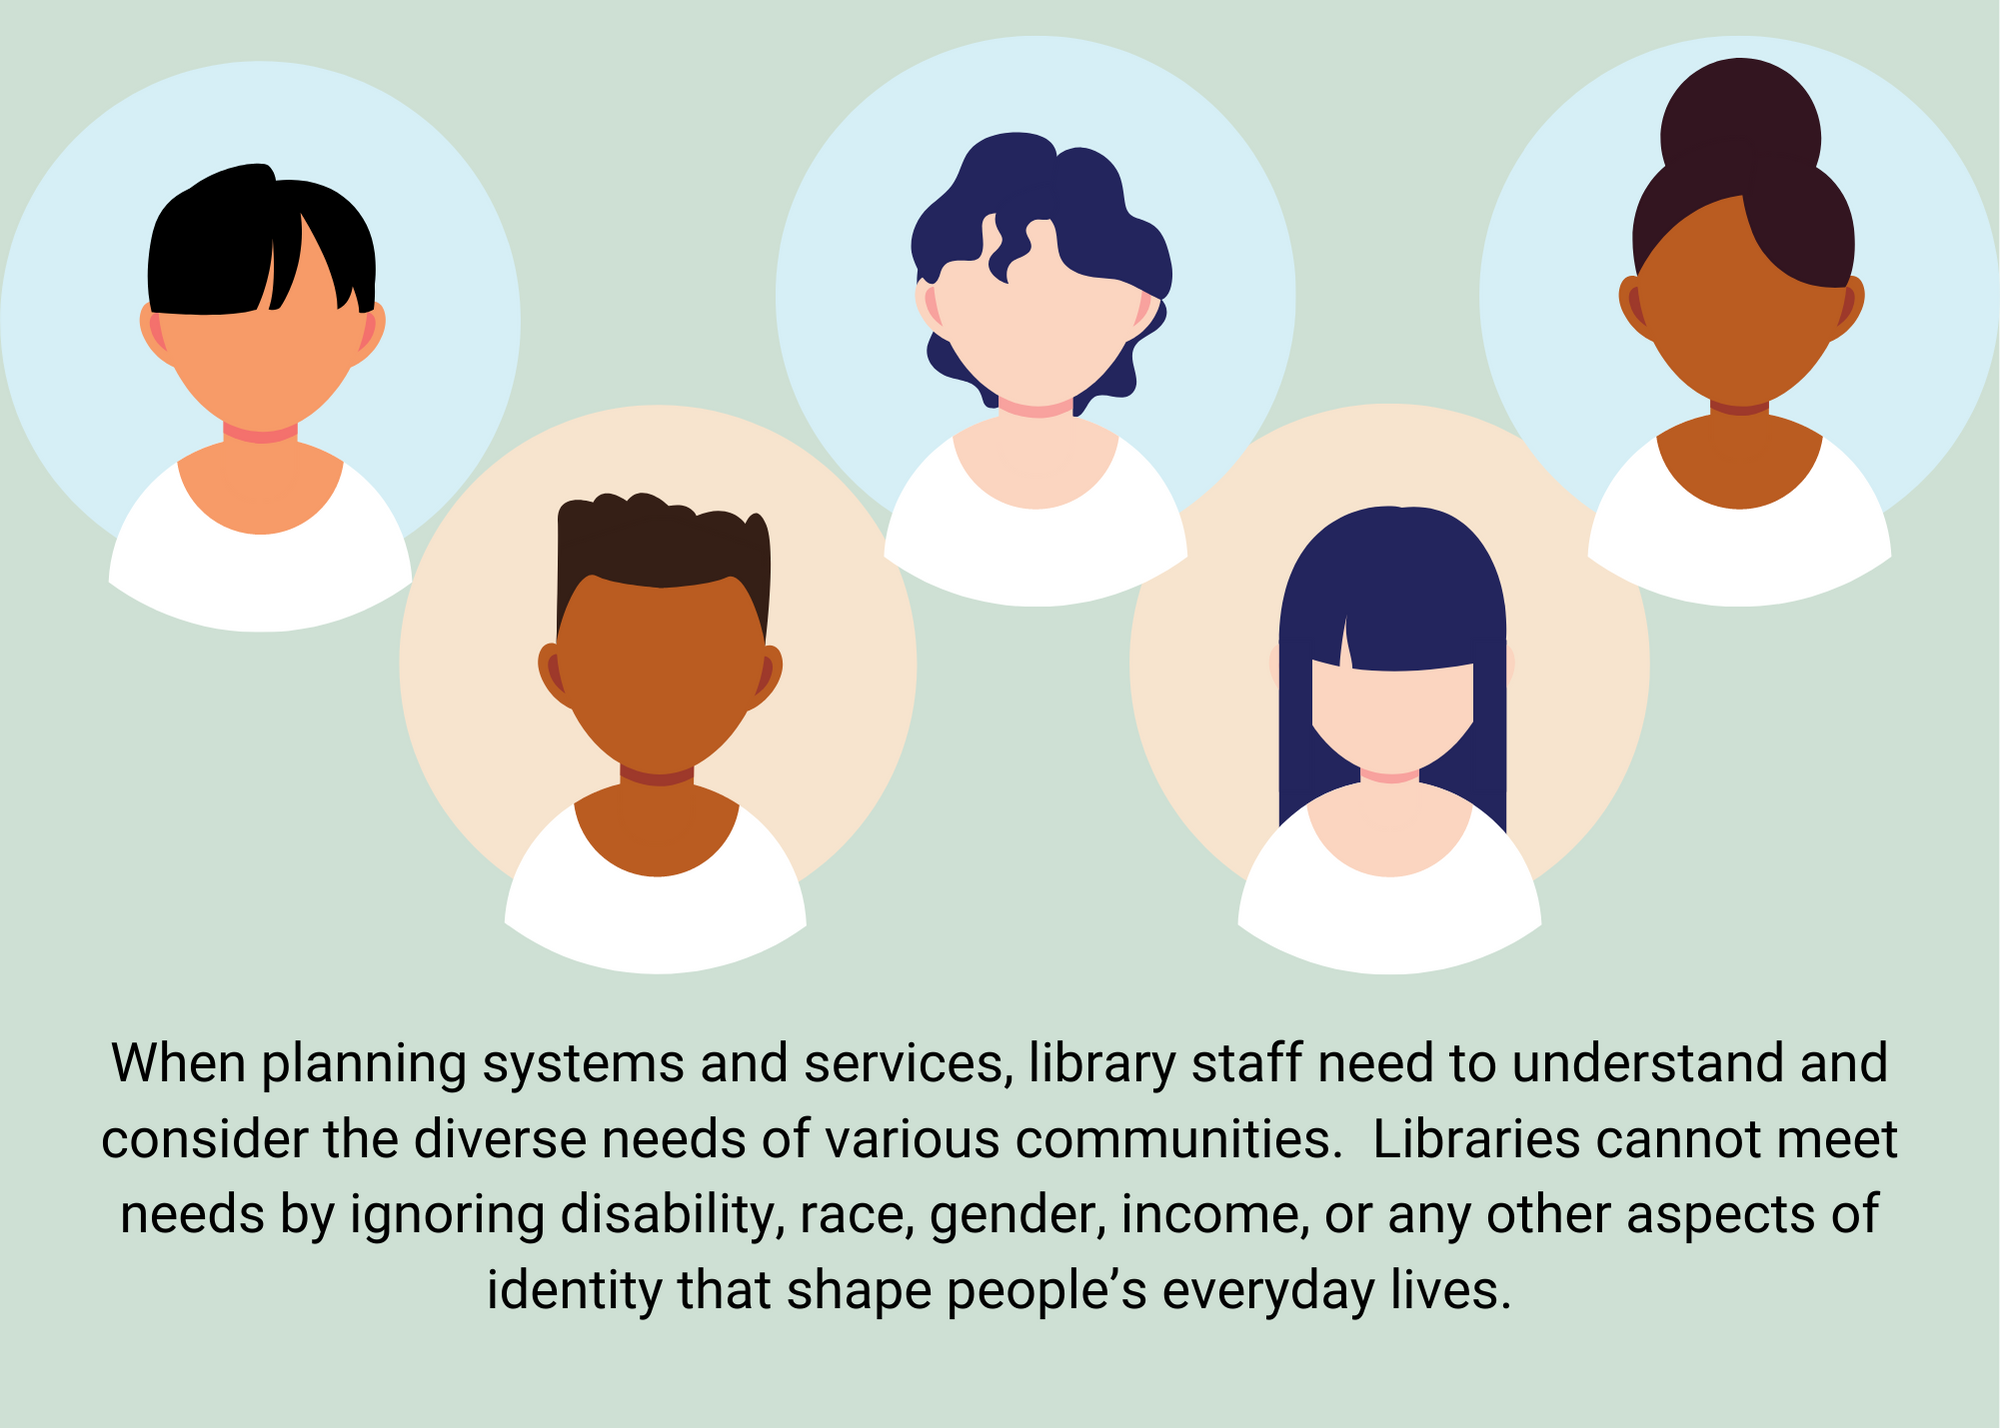 Five drawings of people each representing different races and genders. "When planning systems and services, library staff need to understand and consider the diverse needs of various communities. Libraries cannot meet needs by ignoring disability, race, gender, income, or any other aspects of identity that shape people's everyday lives"